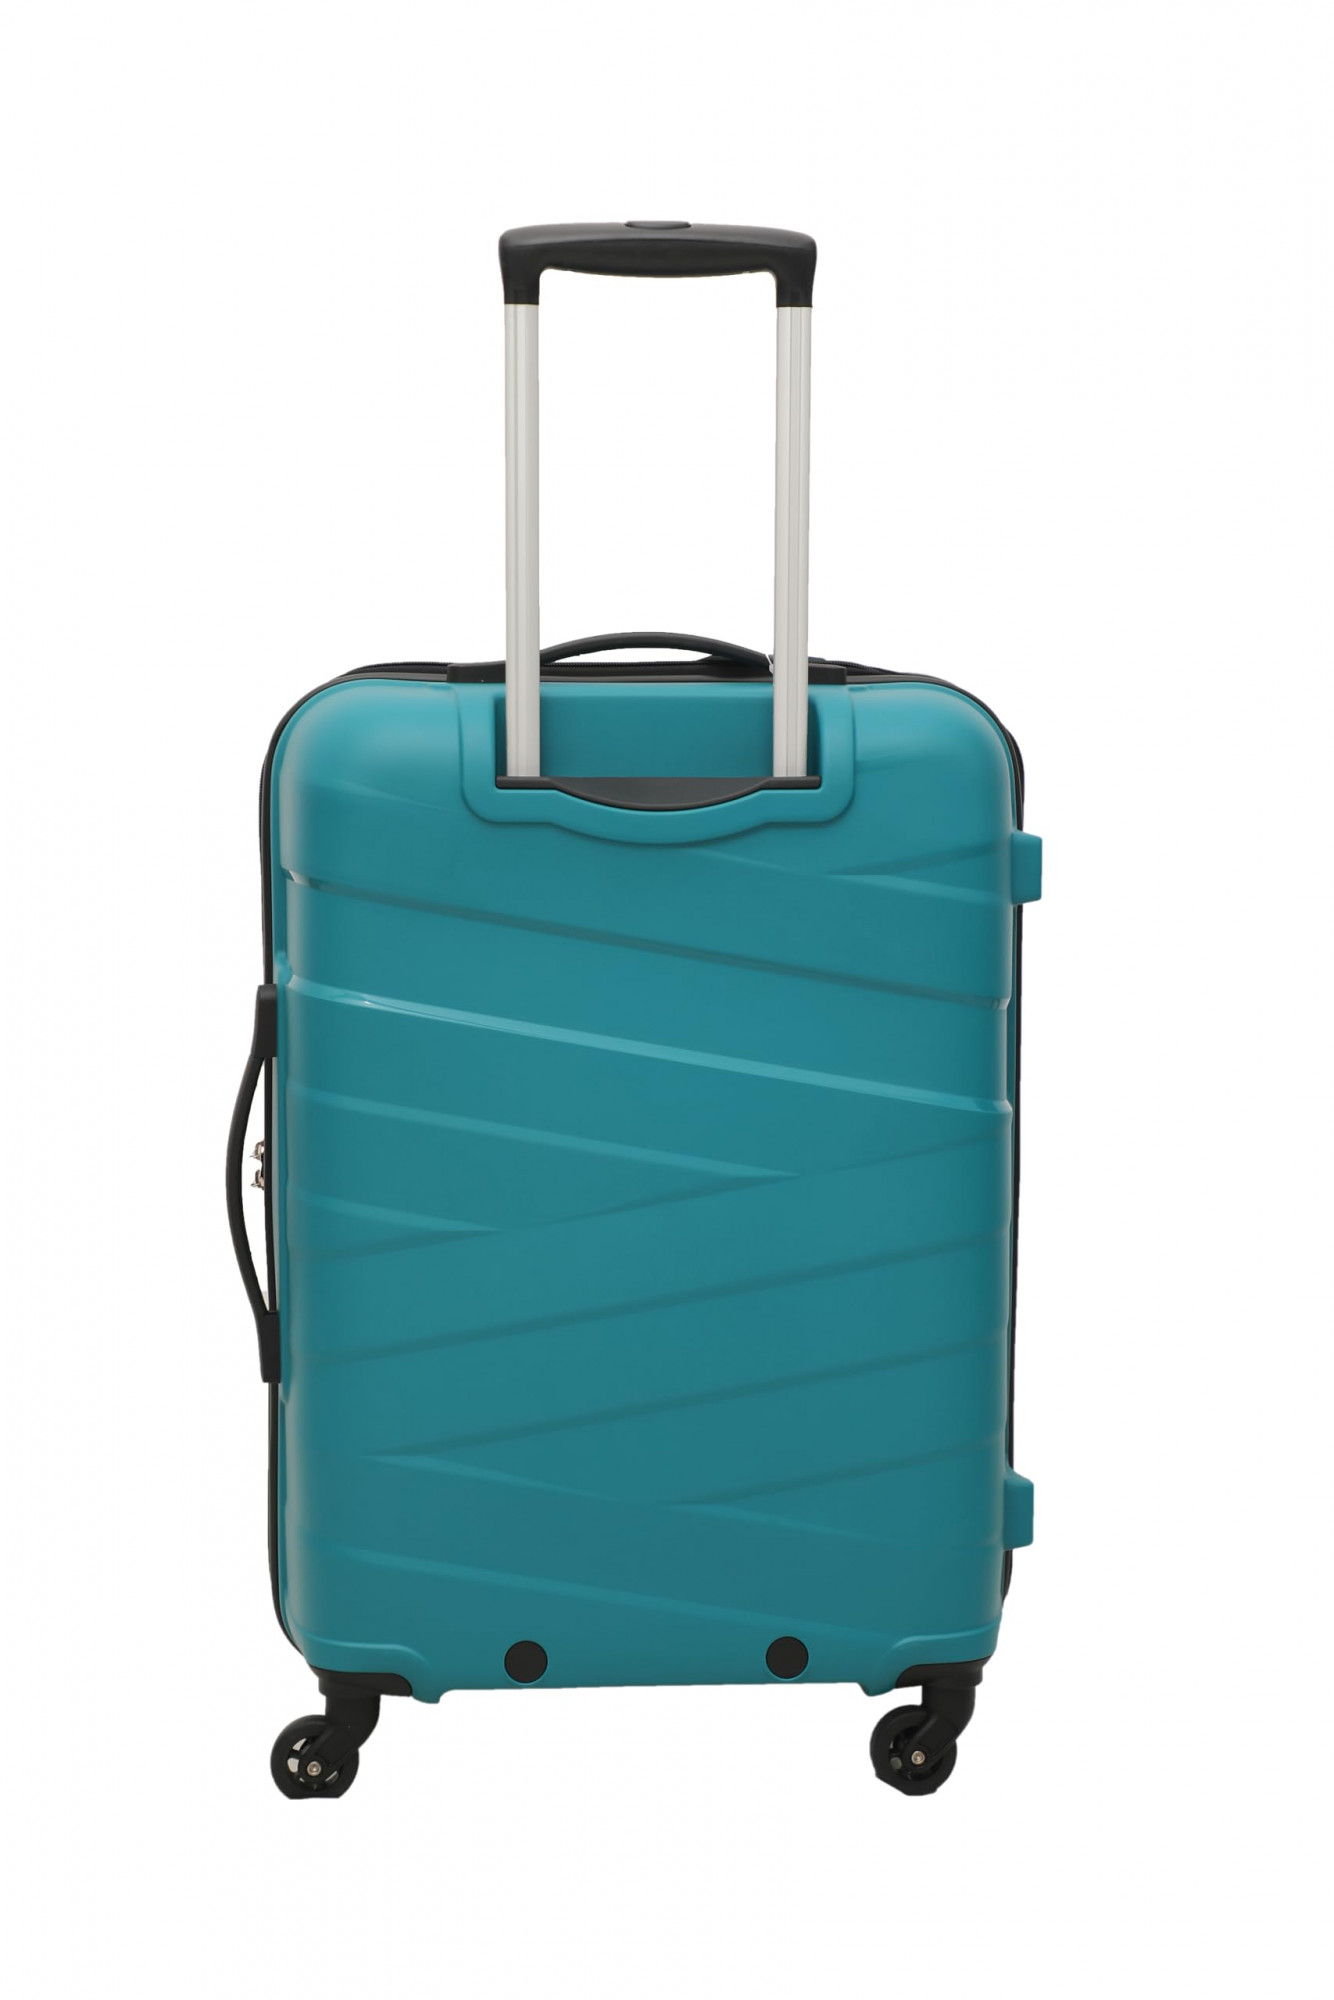 American Tourister Krypton 55 cms Polycarbonate Hardsided Small Cabin  Luggage | Suitcase | Trolley Bag, Grey : Amazon.in: Fashion